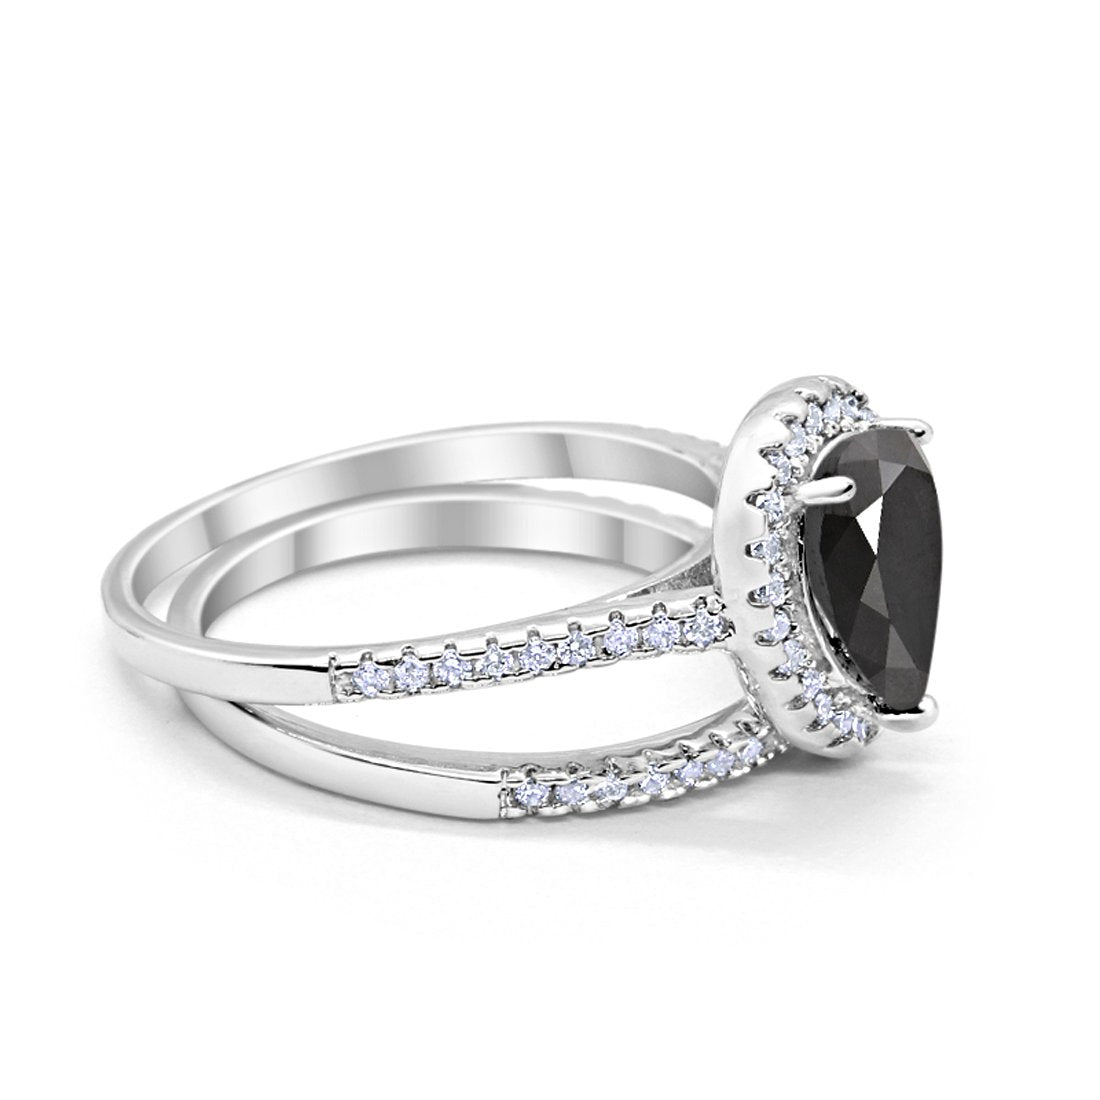 Teardrop Pear Bridal Set Engagement Ring Simulated Black Cubic Zirconia 925 Sterling Silver